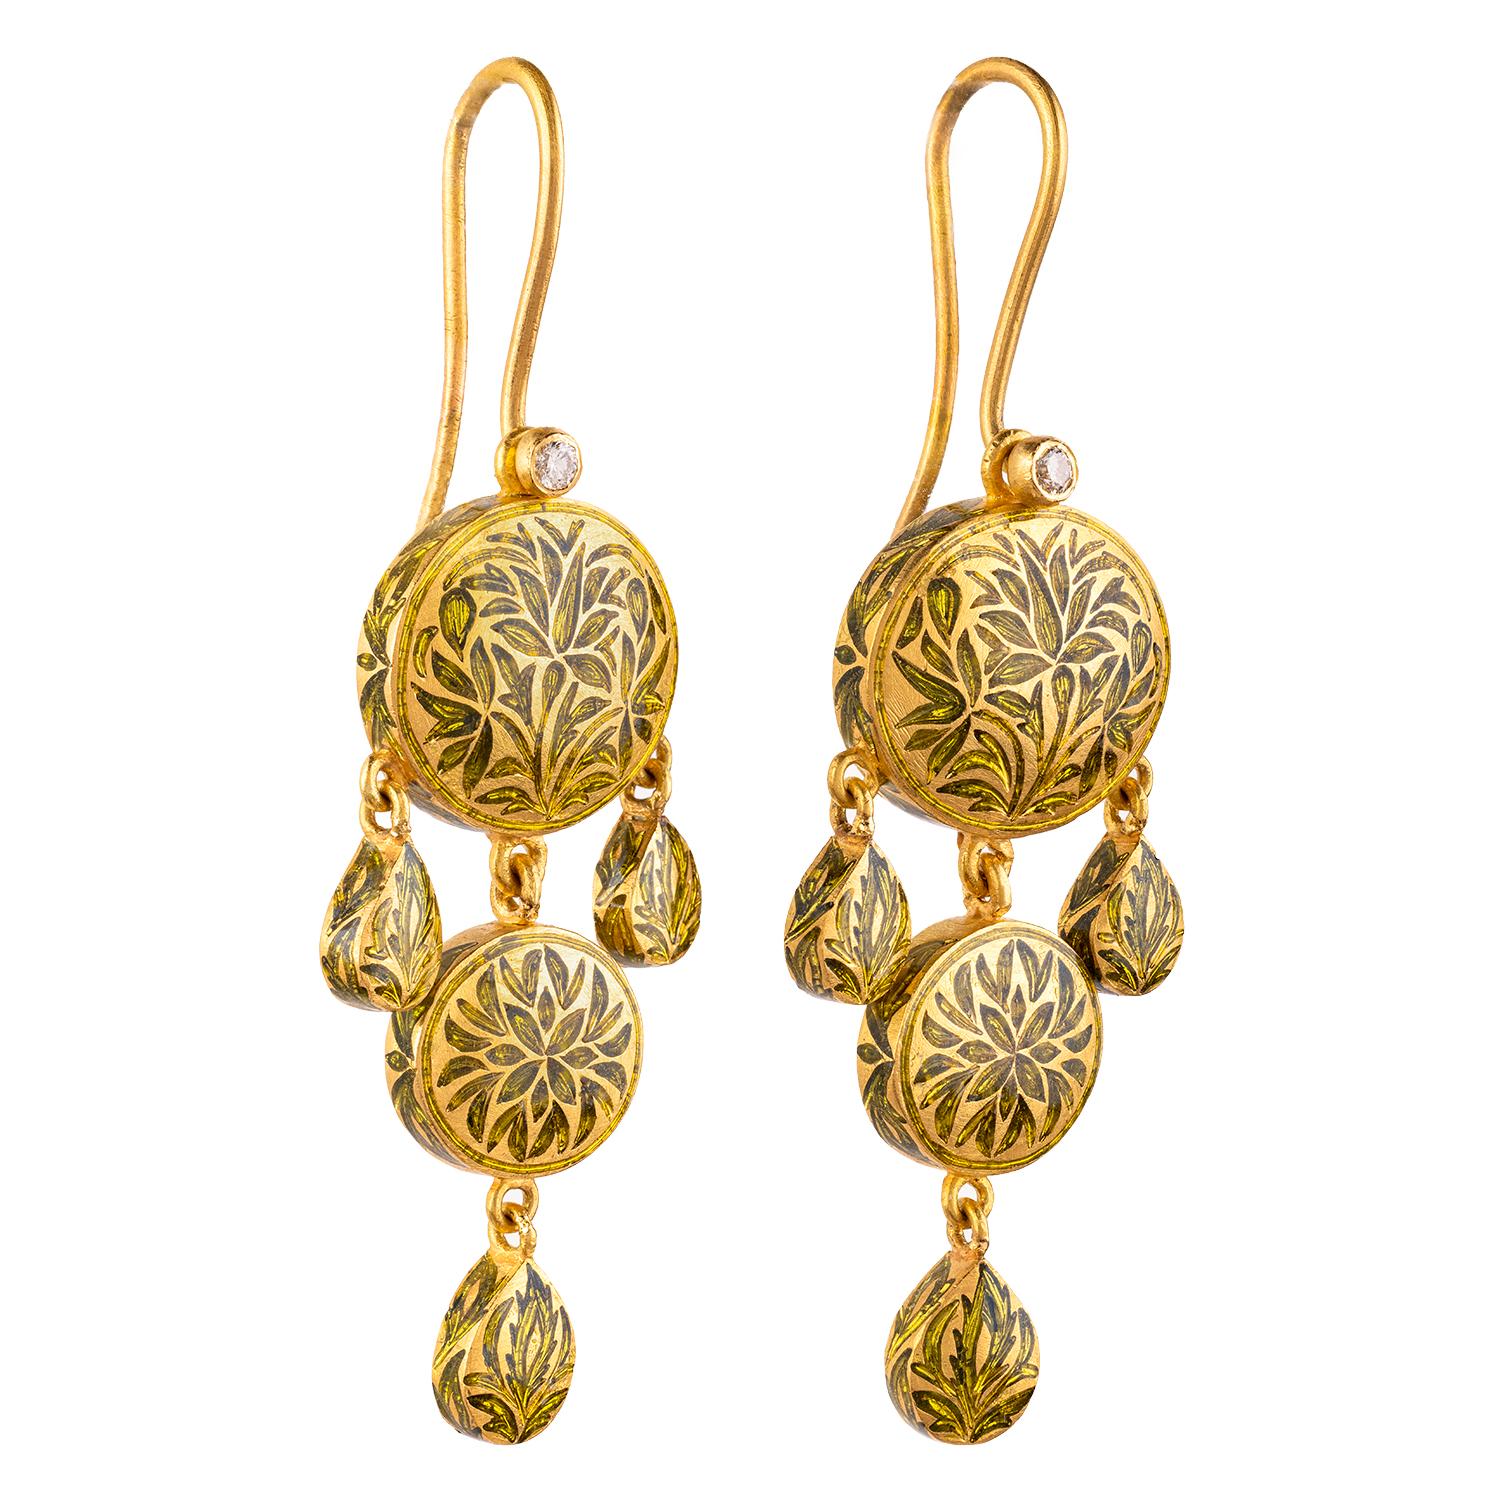 So much like Chartreuse - sweet and spicy, herbal and floral and undeniably intoxicating!

Introducing the exquisite 22K Gold Handmade Girandole Style Dangle Earrings, where an aura of intrigue and allure is created by the enchanting chartreuse